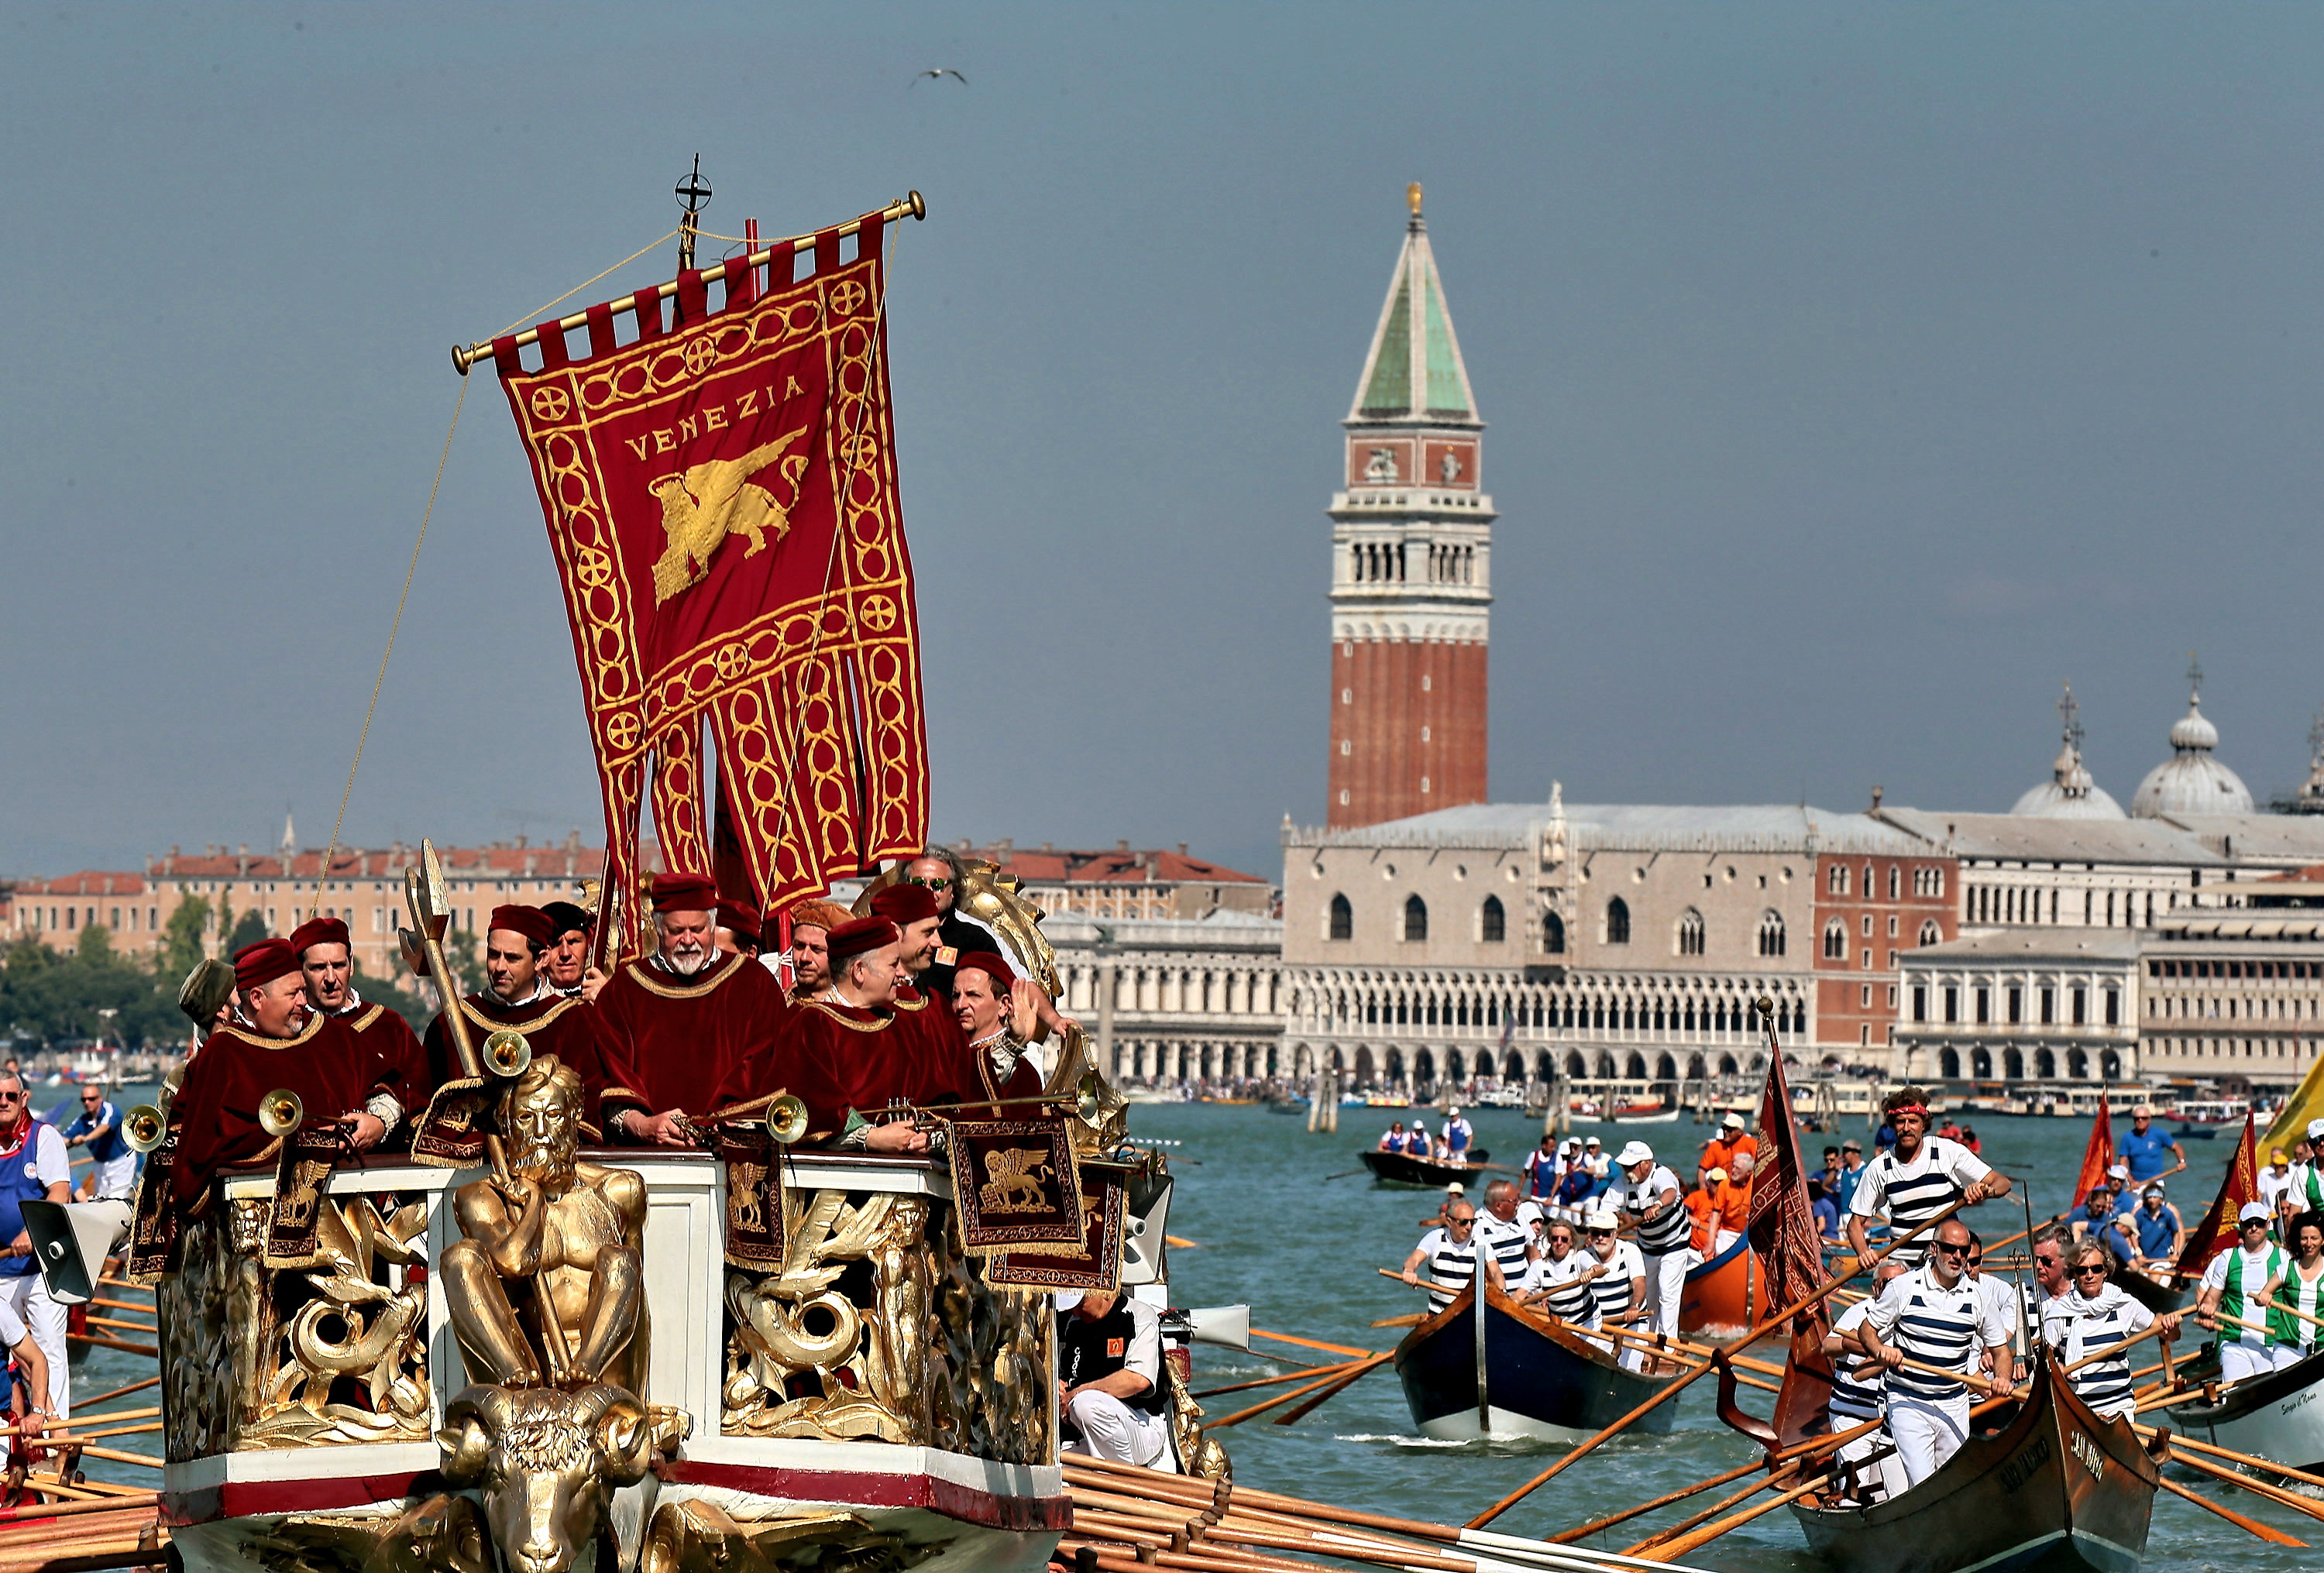 VENICE, ITALY - MAY 08: details of the Serenissima boat during the Sensa procession in Bacino Saint's Mark on May 08, 2016 in Venice, Italy. The festival of la Sensa is held in May on the Sunday after Ascension Day and follows a reenactment of the traditional ceremony where the Doge enacted the wedding of Venice to the sea.  (Photo by Awakening/Getty Images)